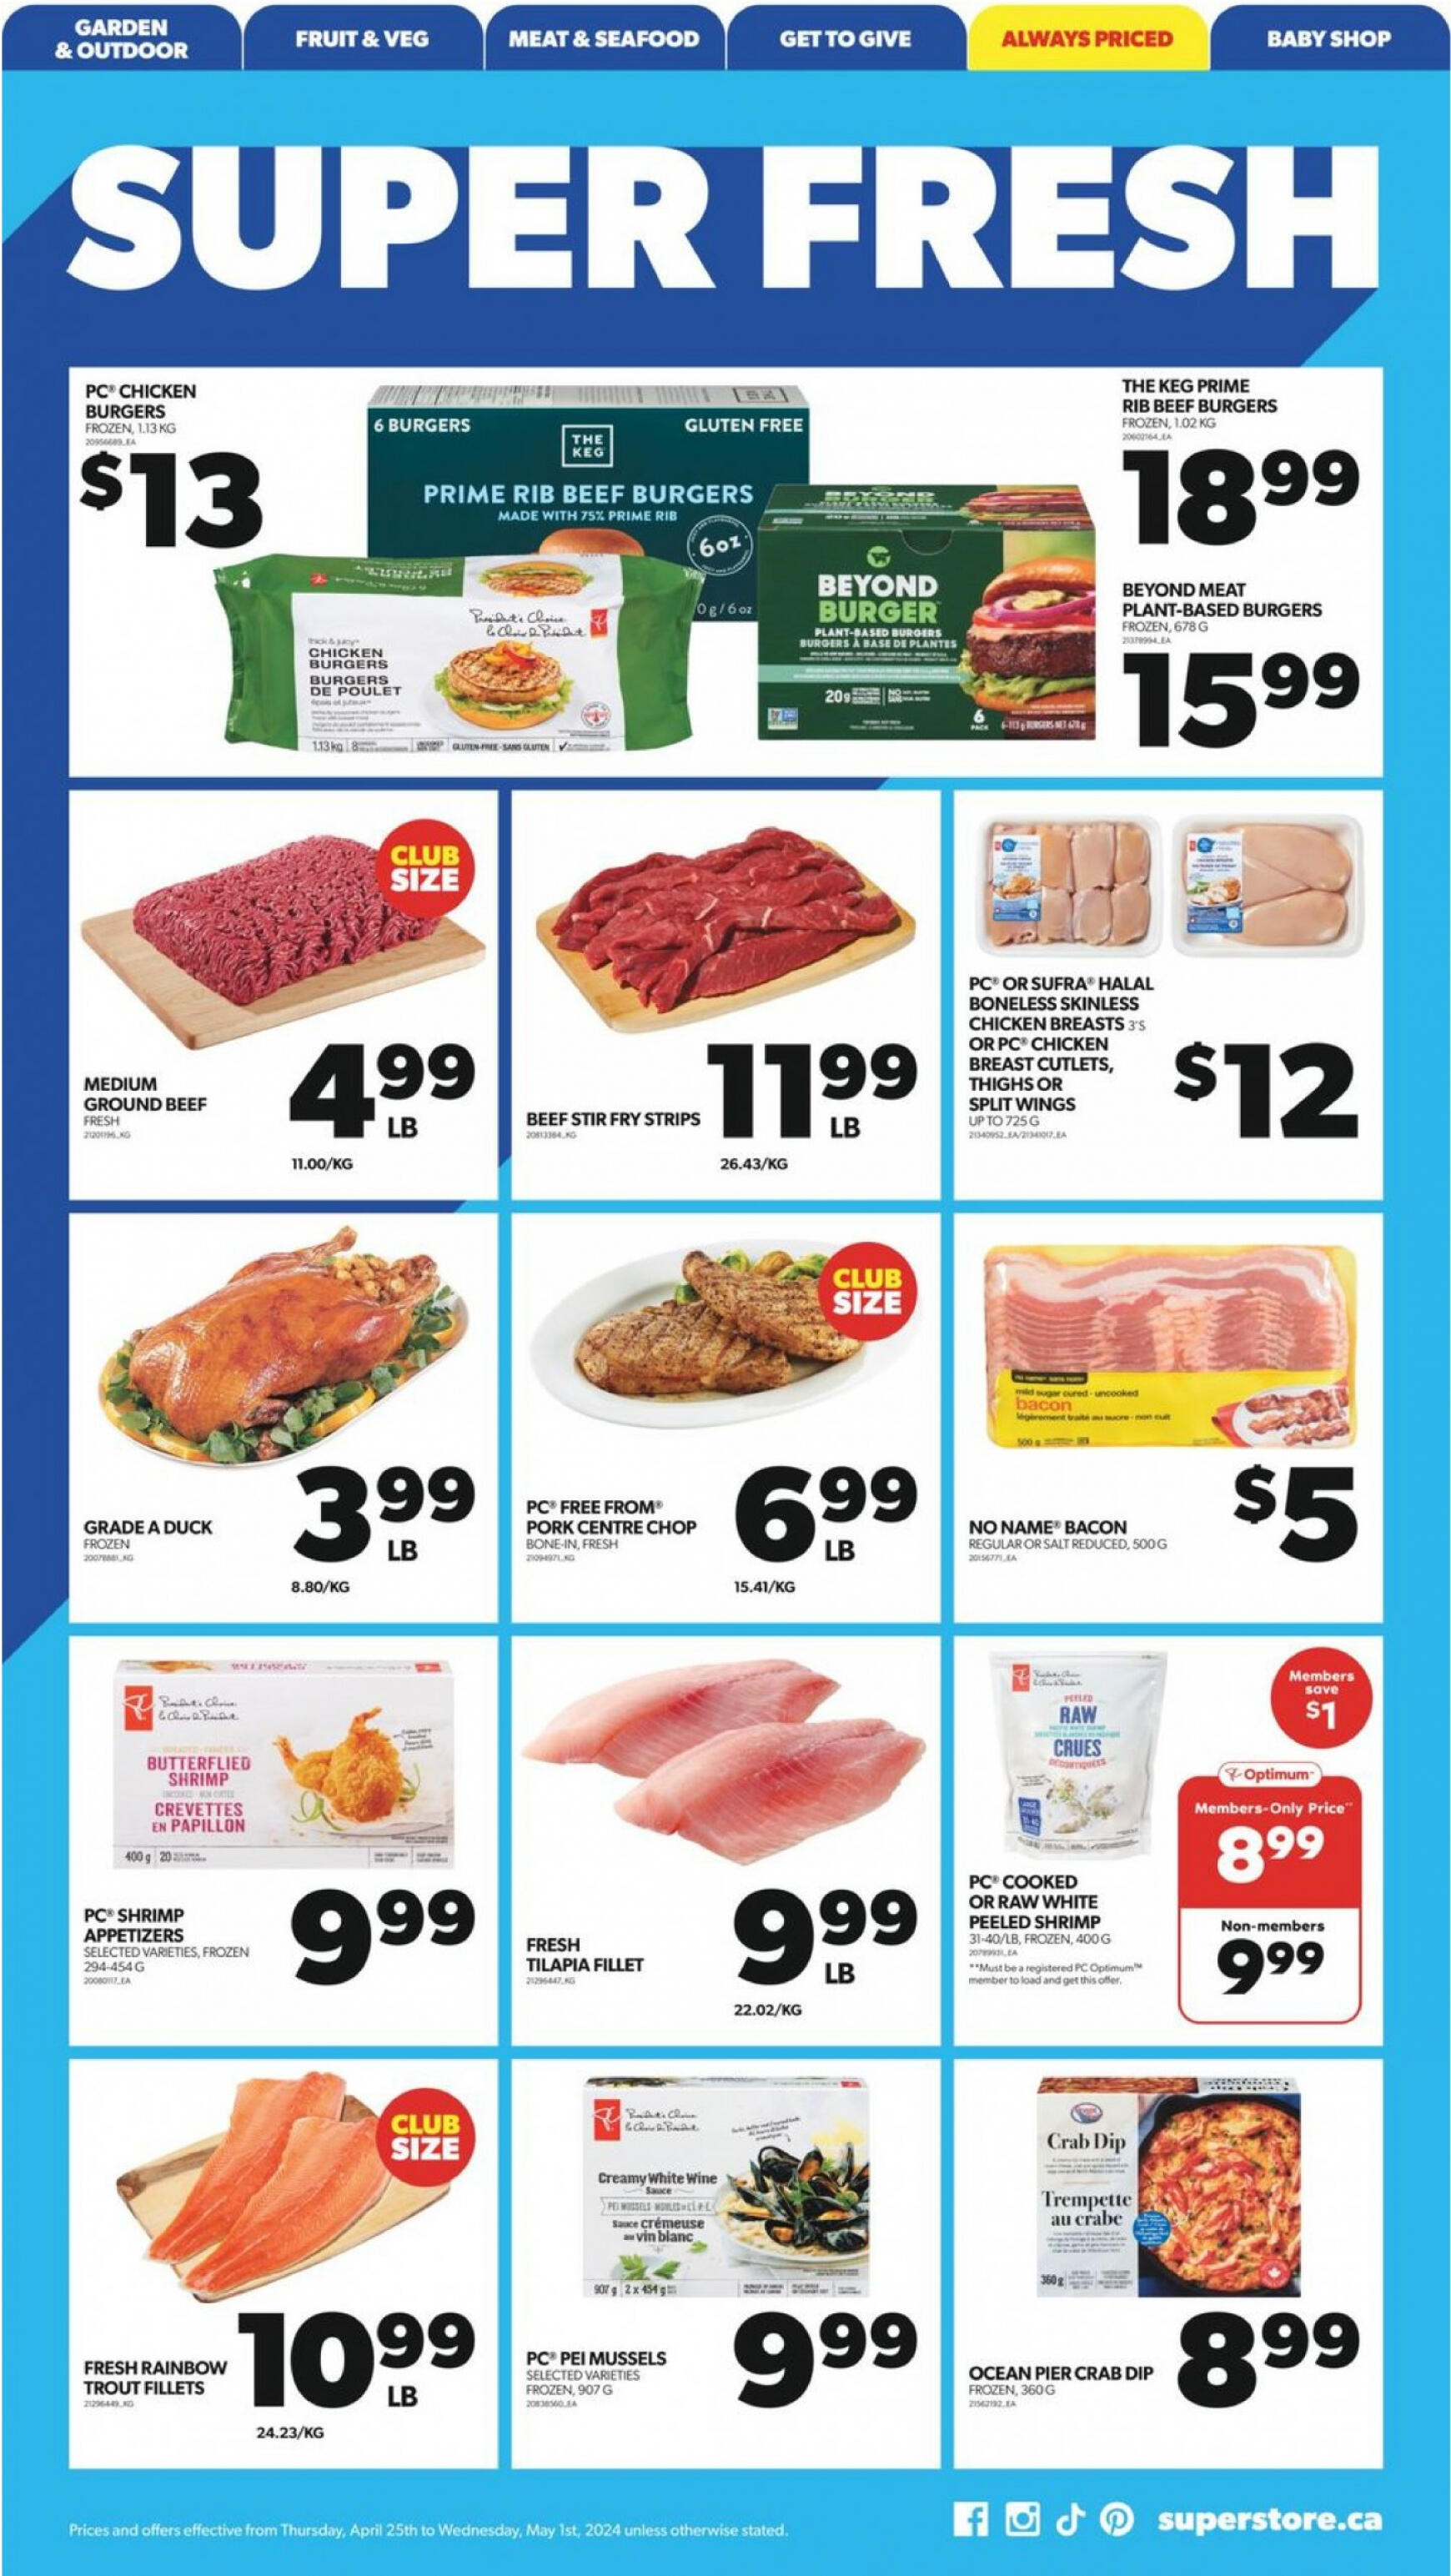 real-canadian-superstore - Real Canadian Superstore flyer current 01.05. - 31.05. - page: 9